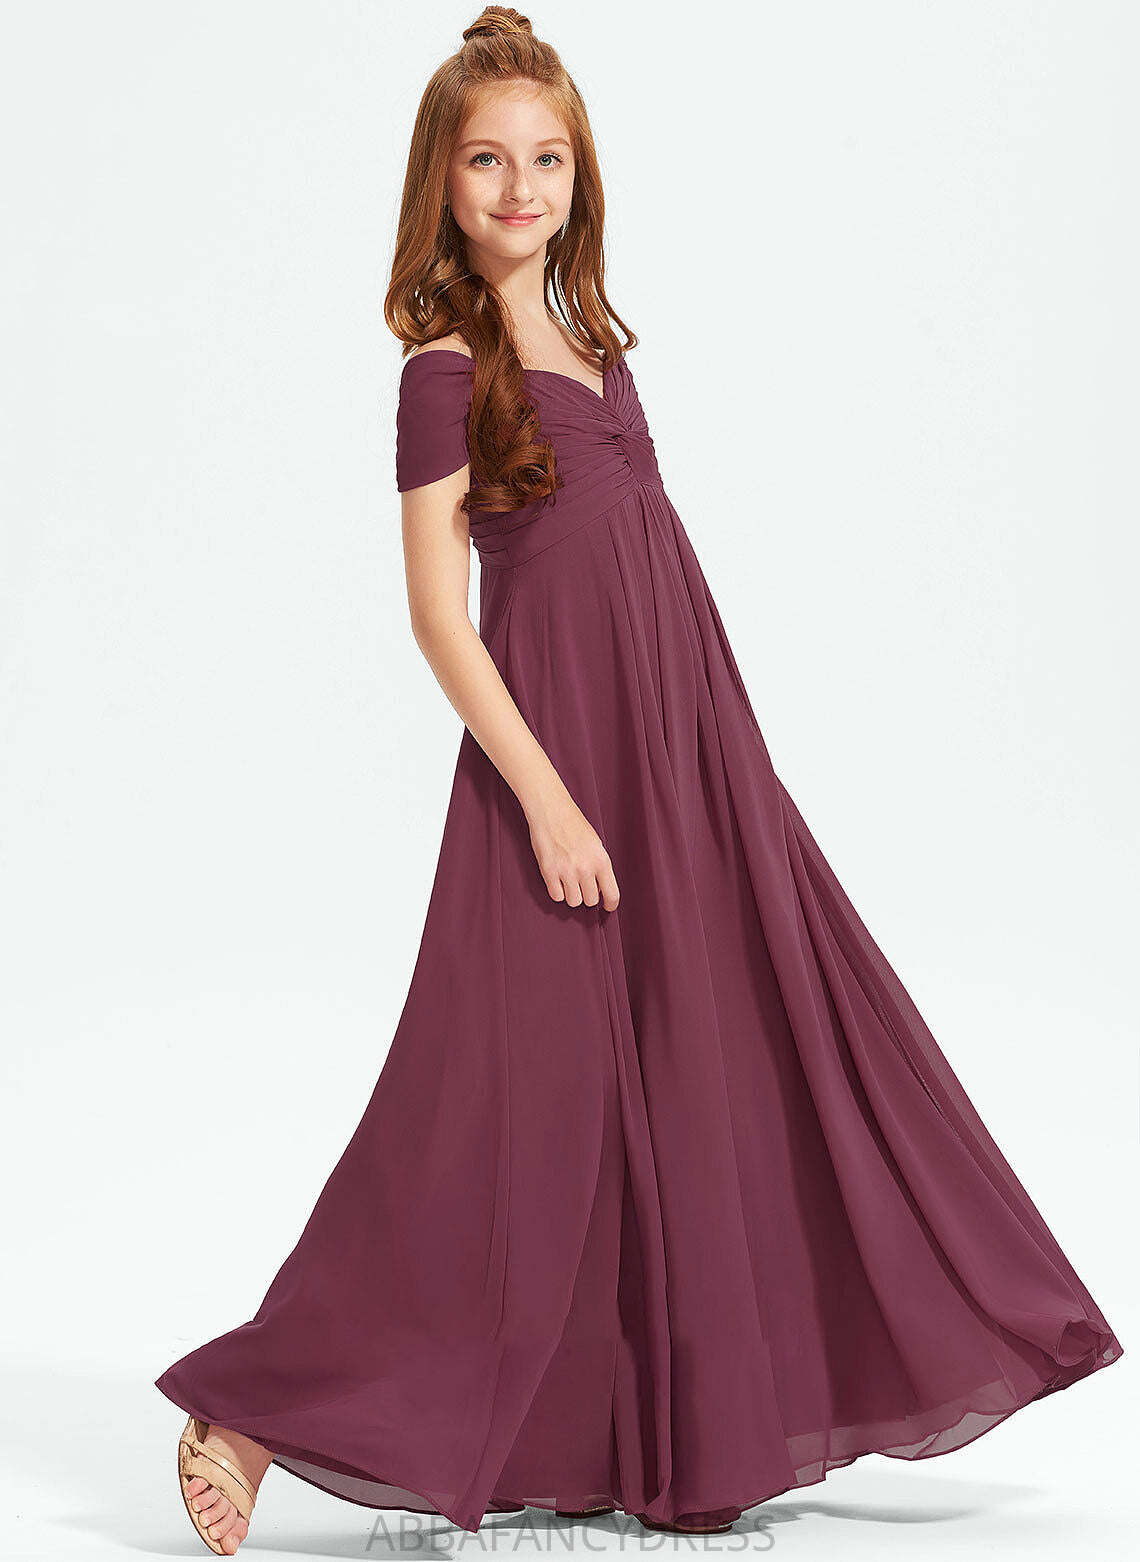 Ruffle With Chiffon Junior Bridesmaid Dresses A-Line Off-the-Shoulder Floor-Length Isabel